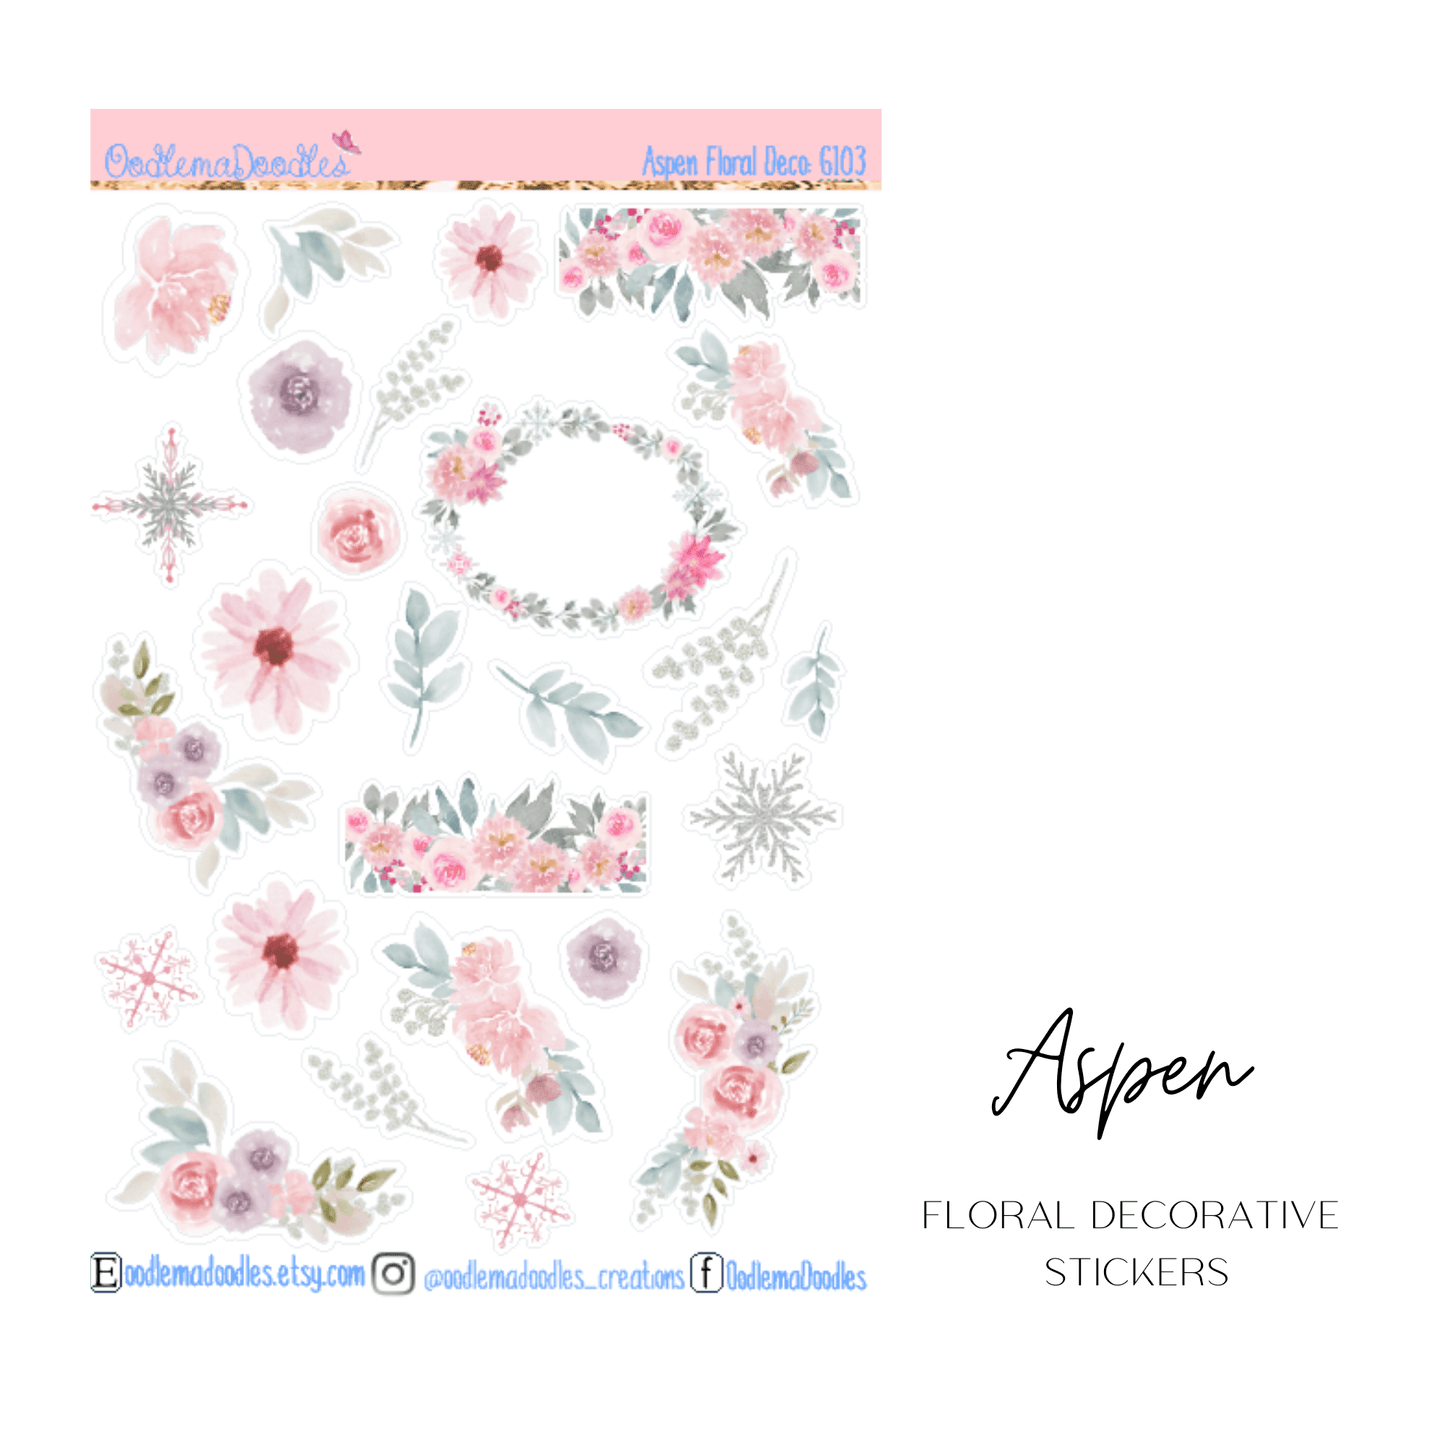 Aspen Floral Decorative Stickers - oodlemadoodles